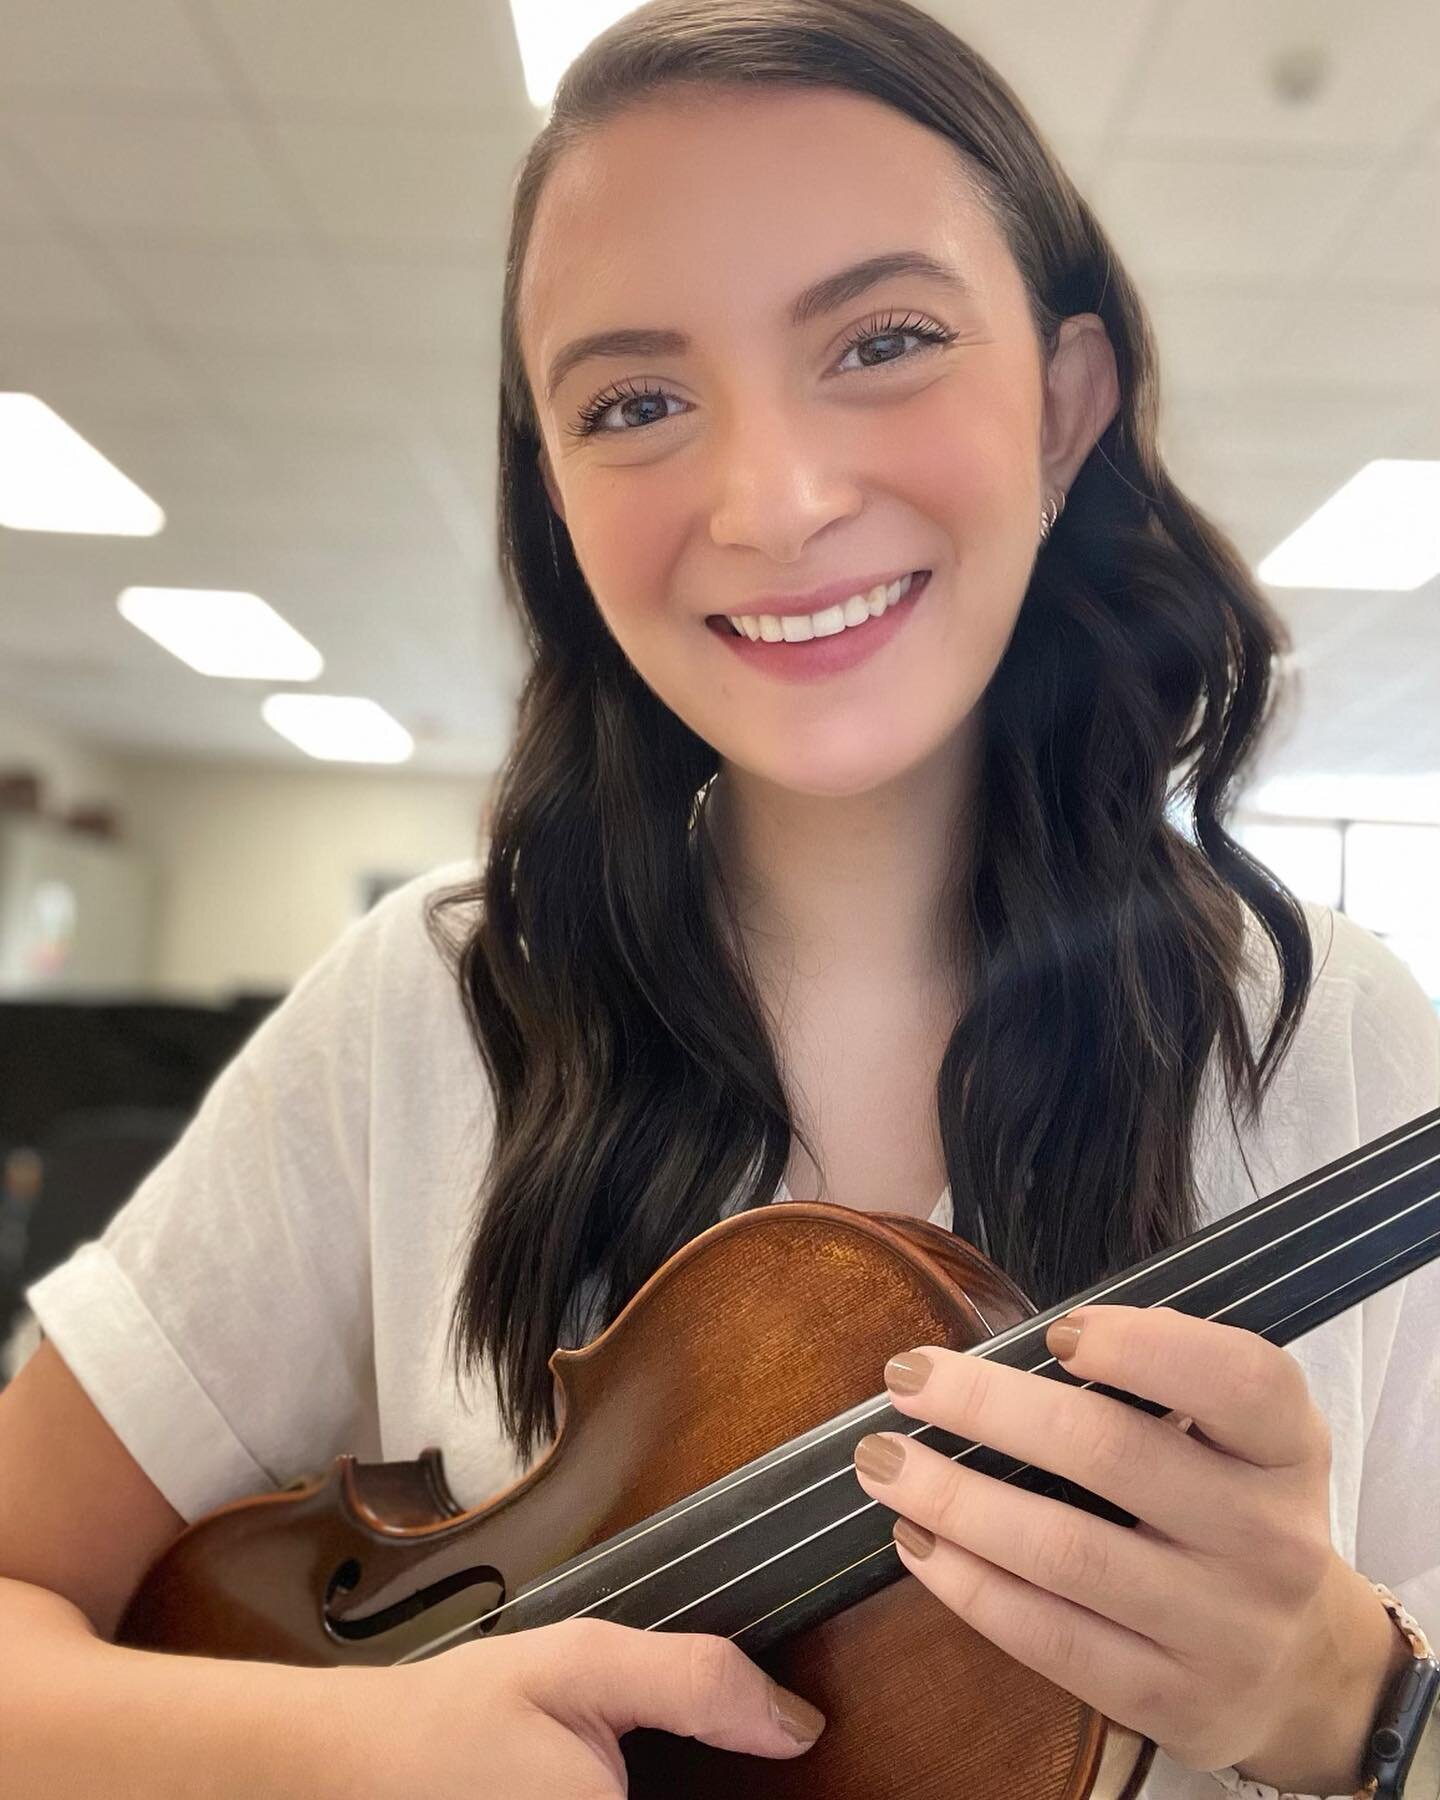 Brookhaven Art and Music is excited to announce that Gabriella Forgit will be joining us as Associate Conductor of the Young People's Orchestra, and Assistant Conductor of the Chamber Ensemble! Be sure to check out Gabriella's bio on our website. Reg